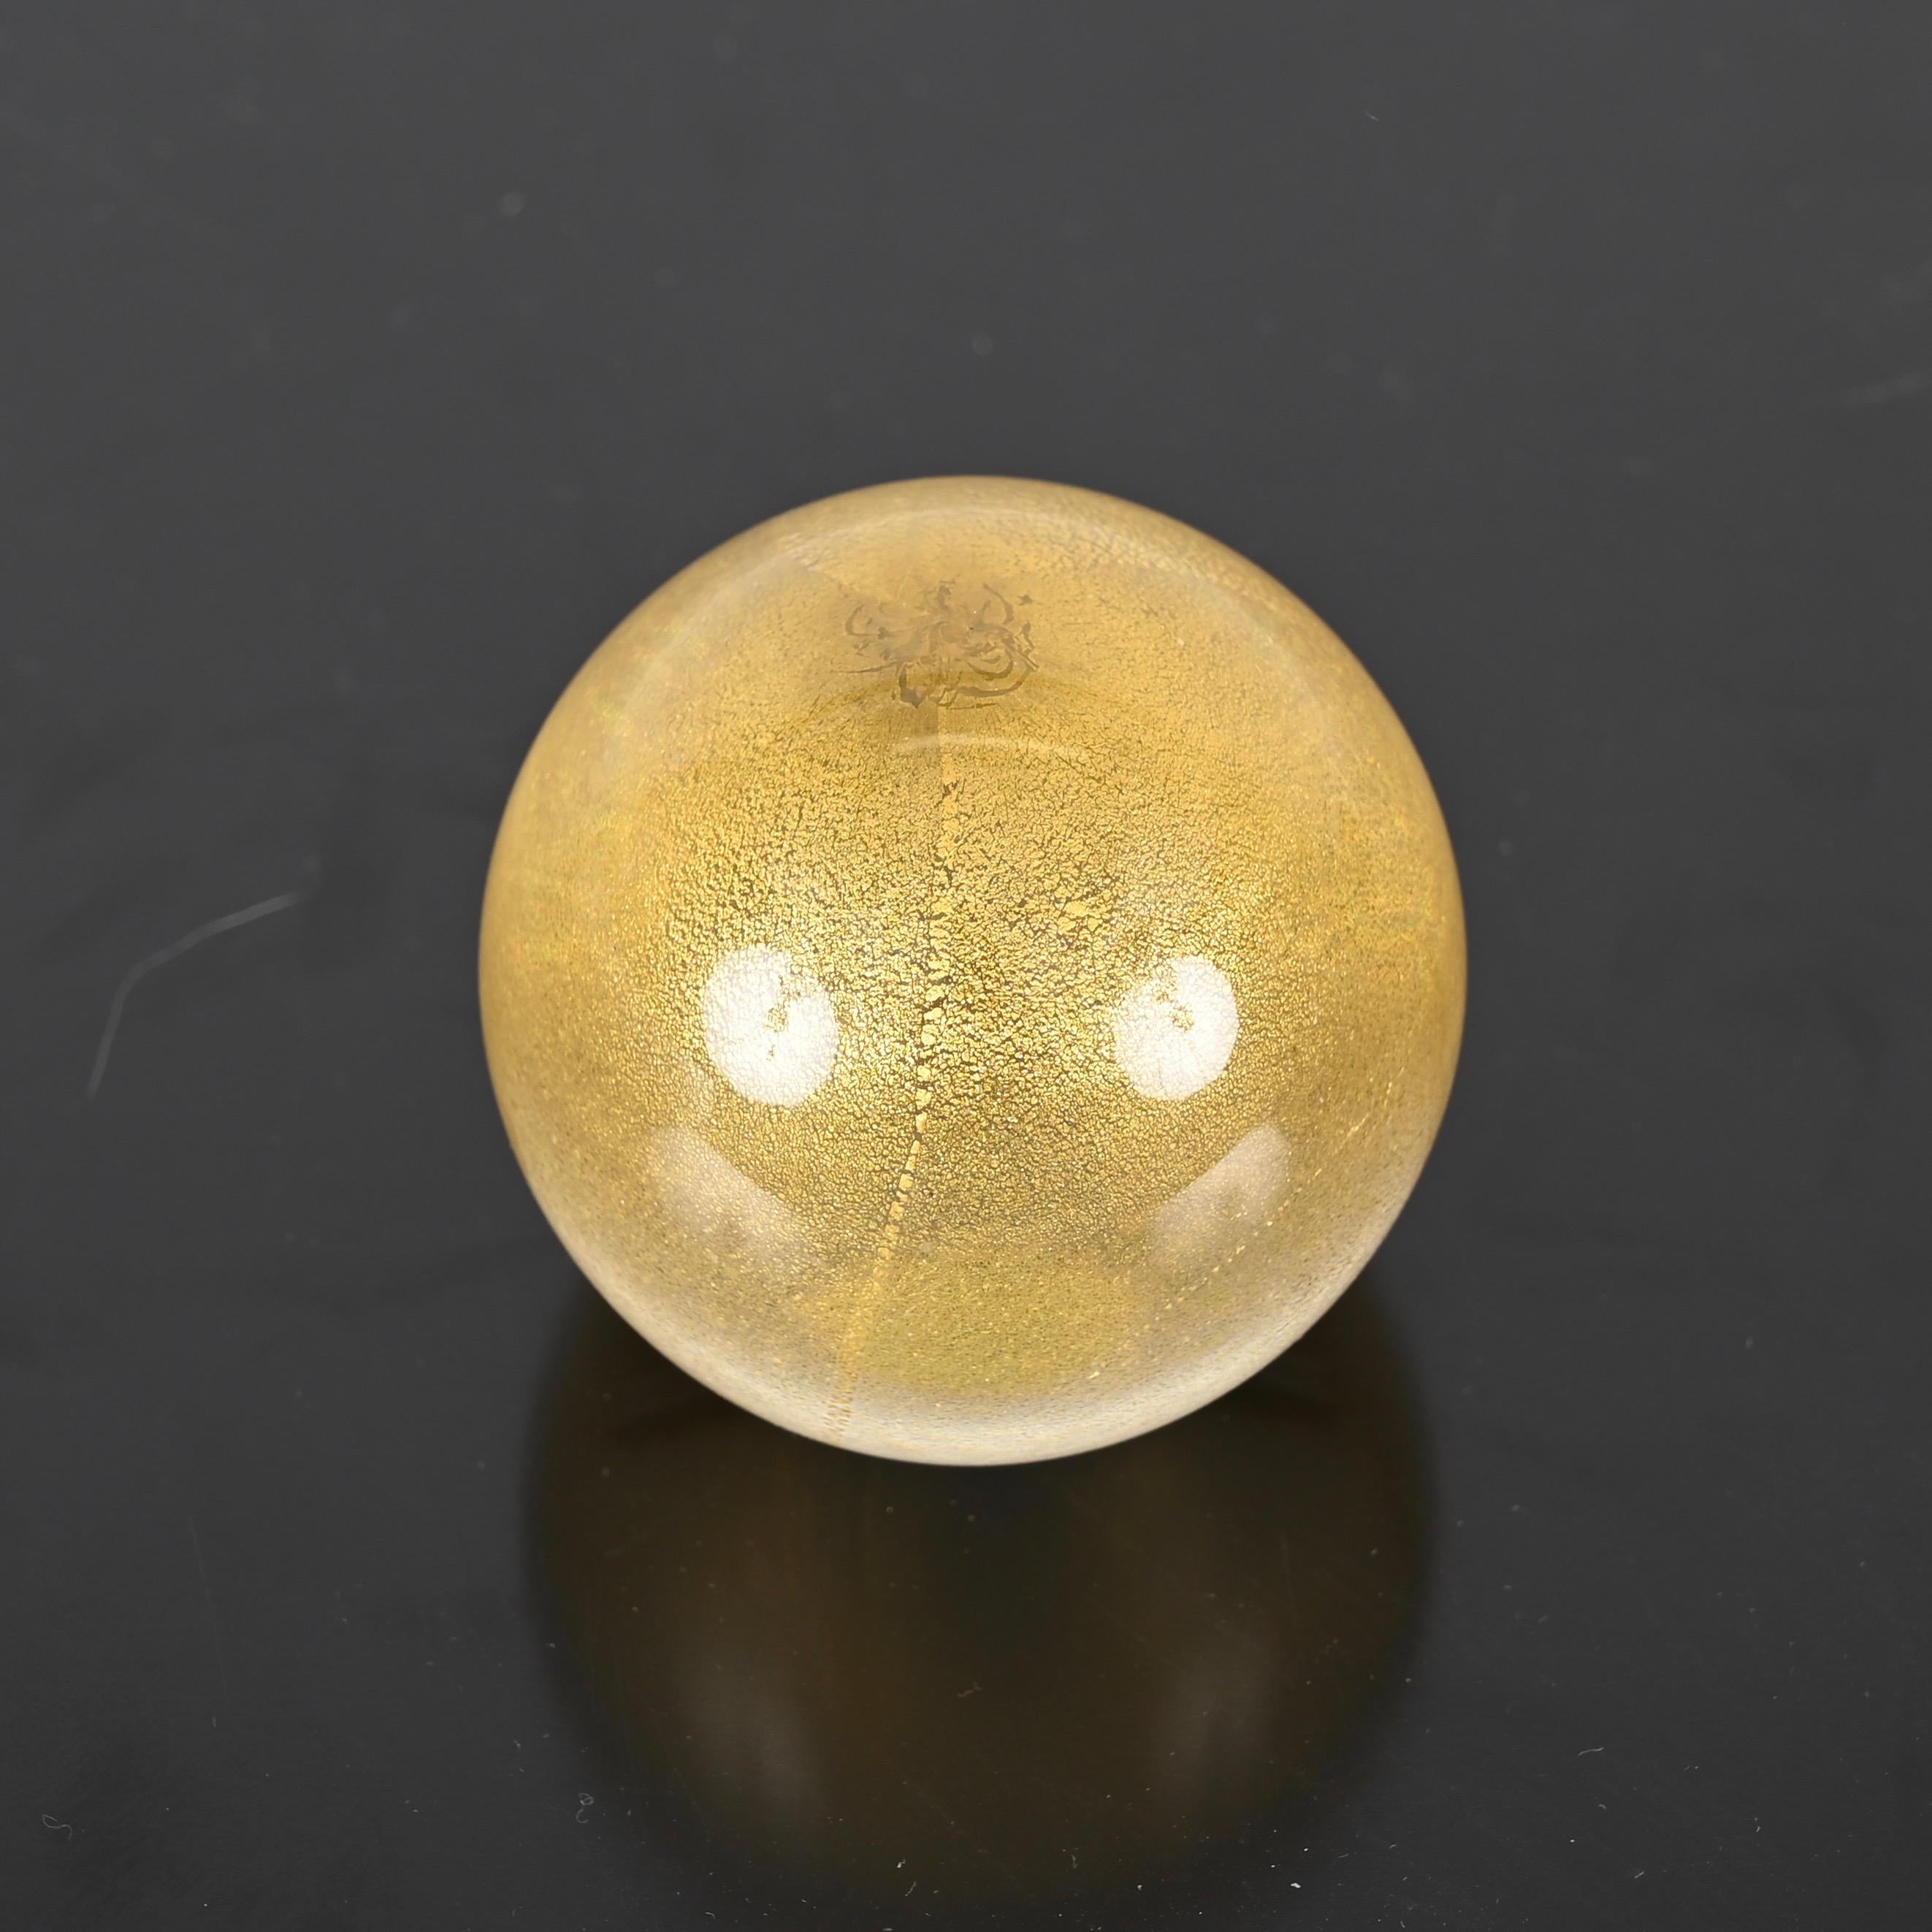 Mid-Century Modern Seguso Spherical Paperweight in Murano Glass with Gold Dust, Italy 1950s For Sale